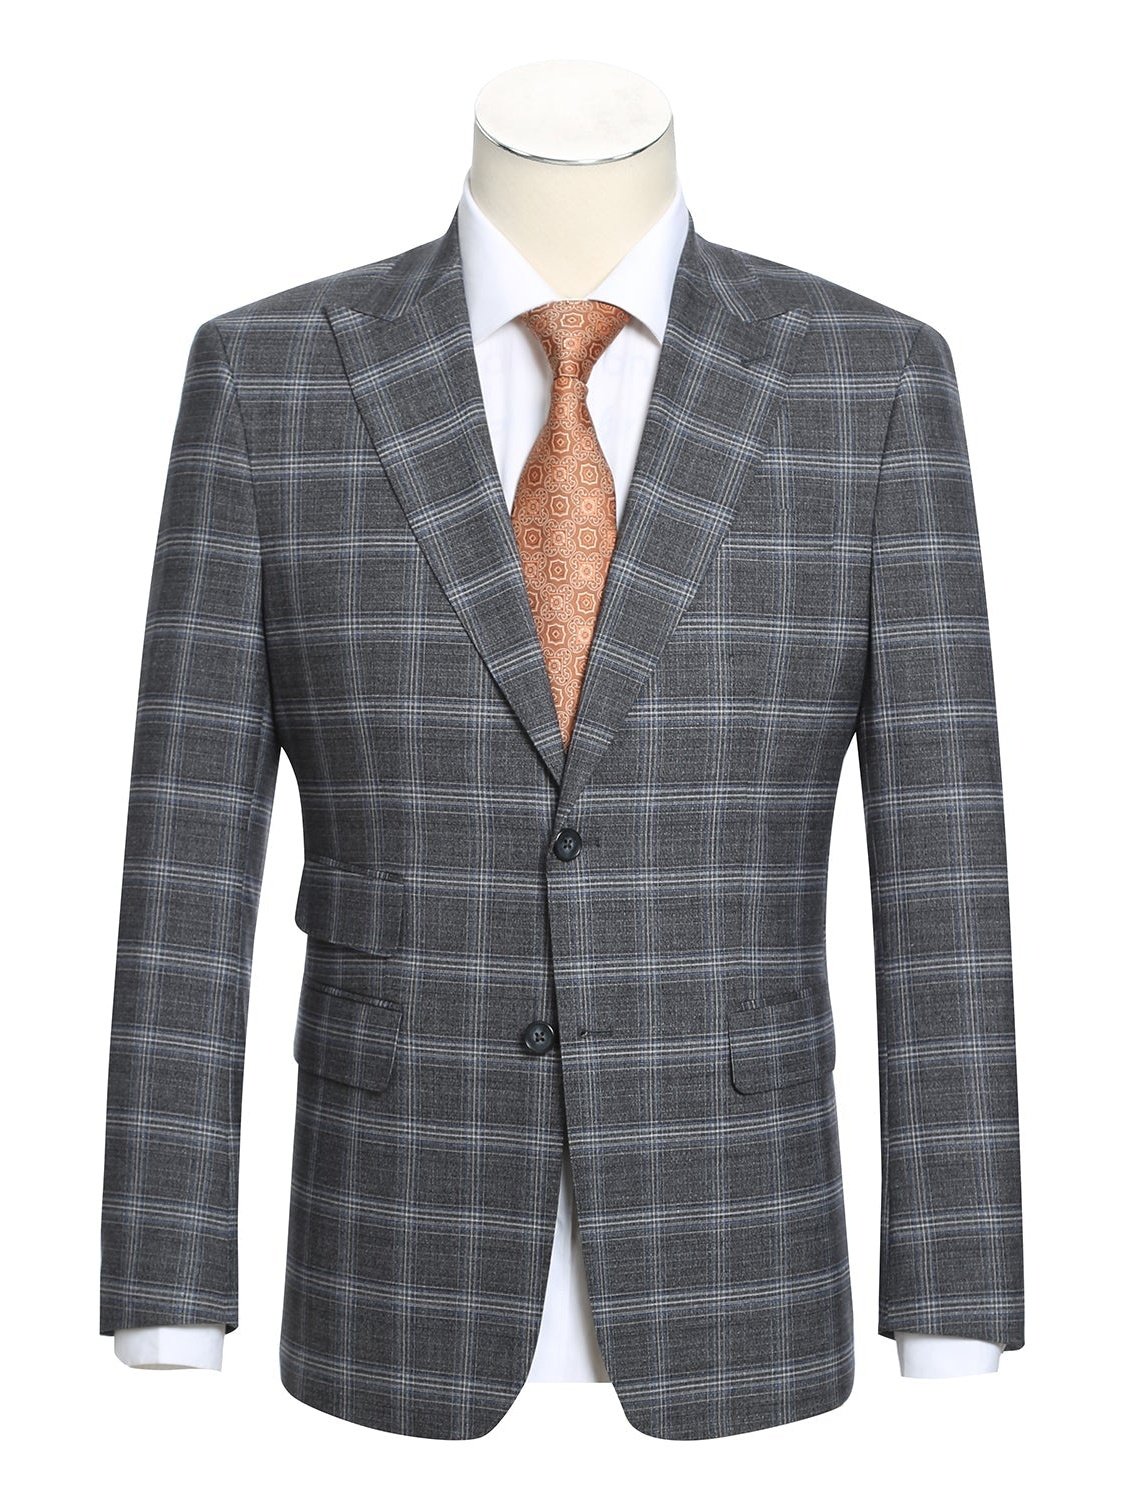 English Laundry Slim Fit Two Button Gray with White Blue Check Peak Lapel Suit